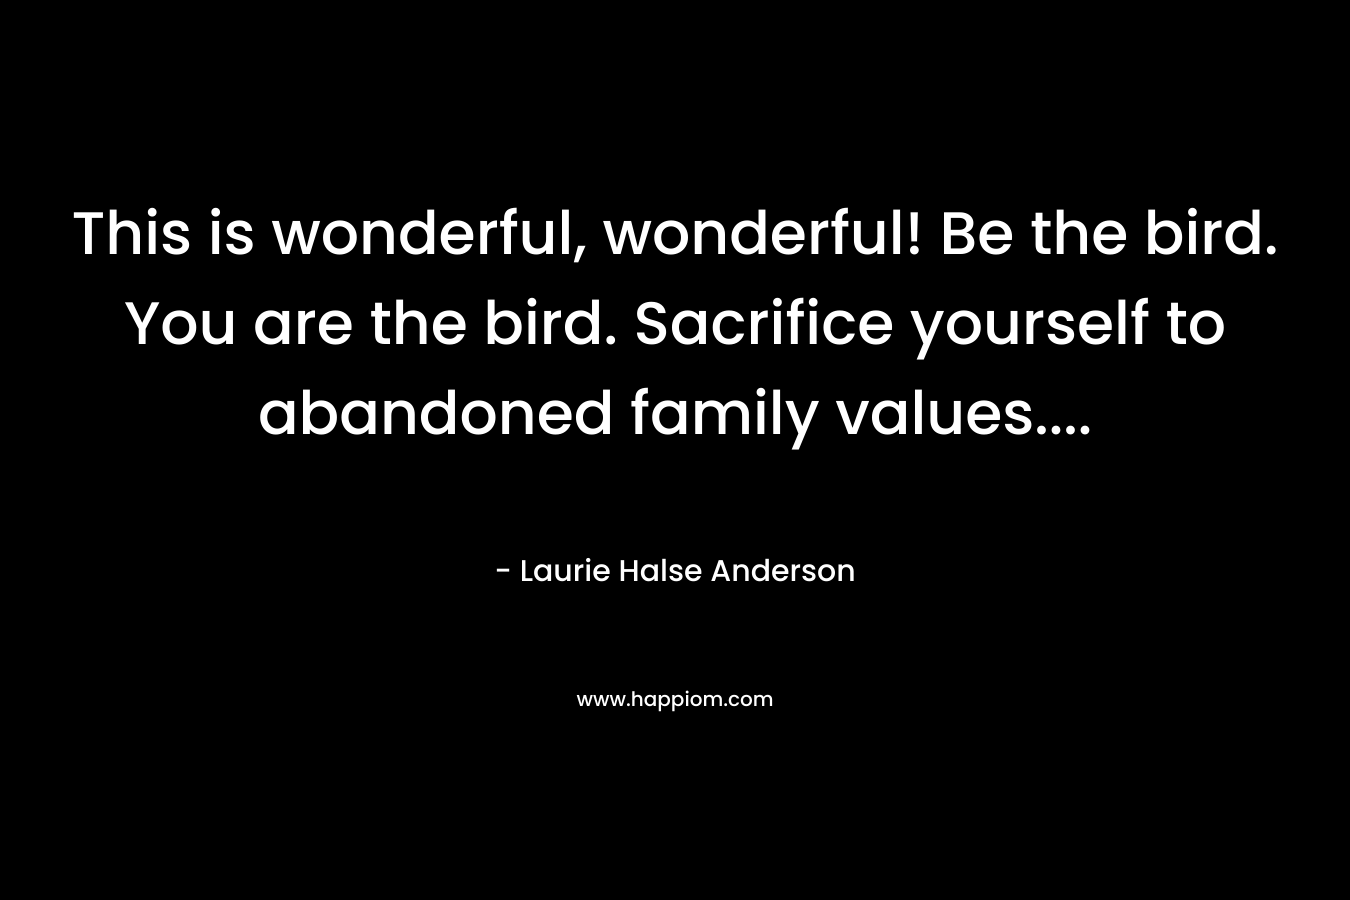 This is wonderful, wonderful! Be the bird. You are the bird. Sacrifice yourself to abandoned family values....